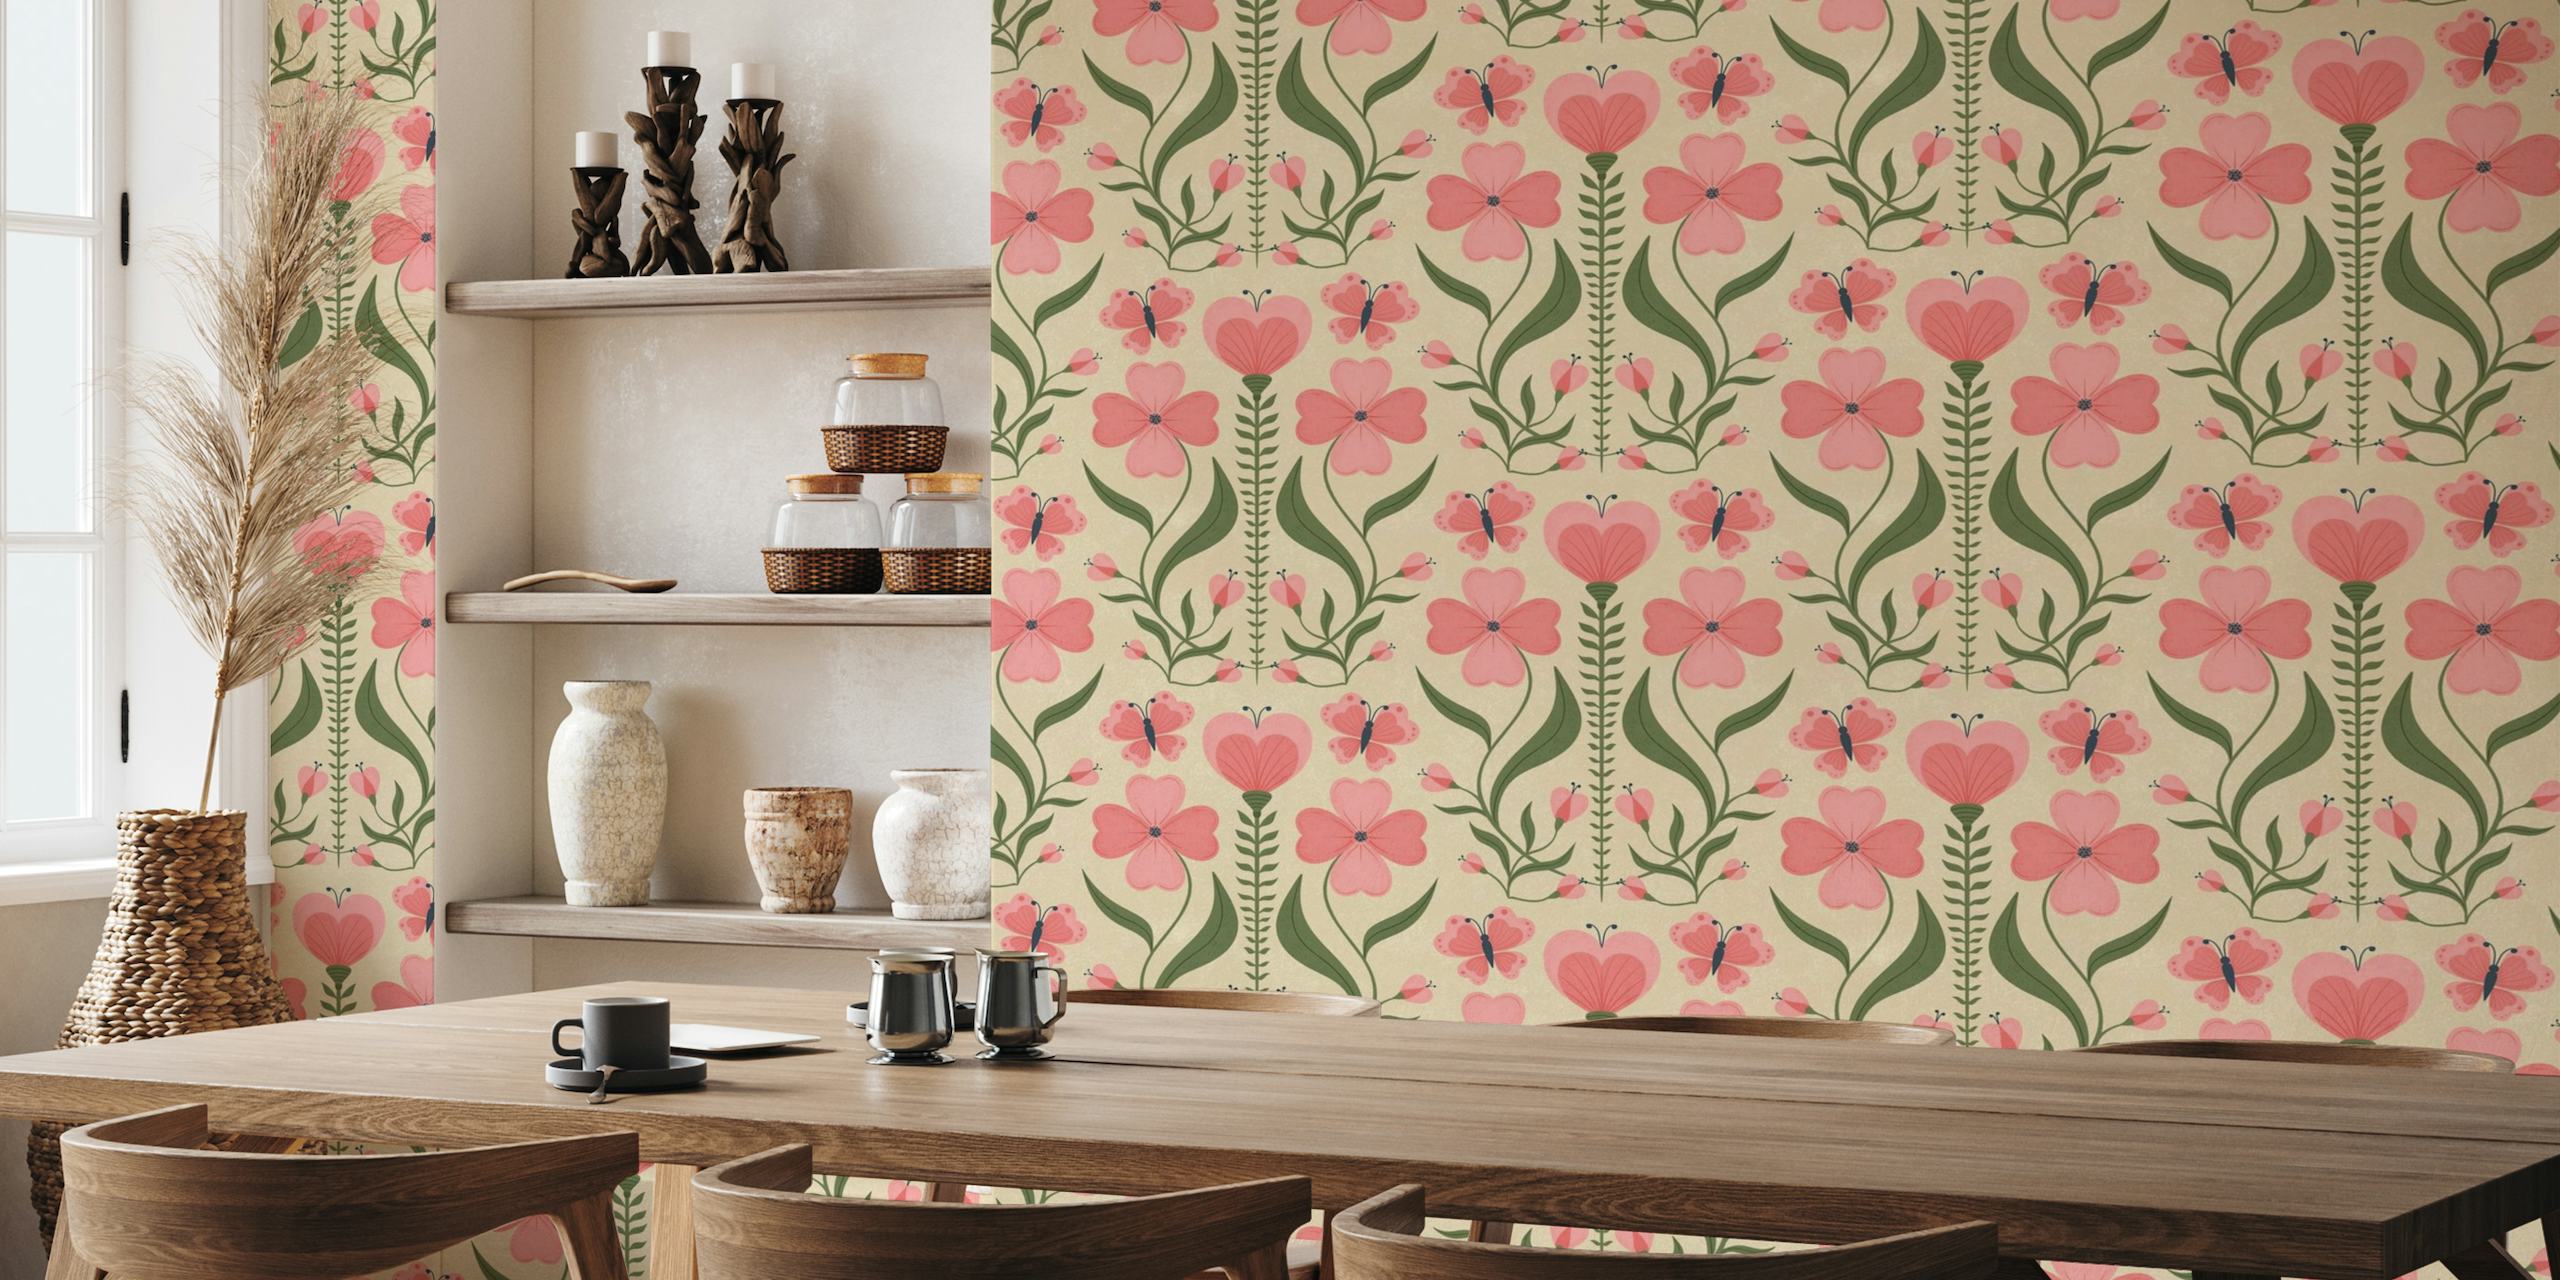 Vintage Pink Floral with Butterflies wallpaper